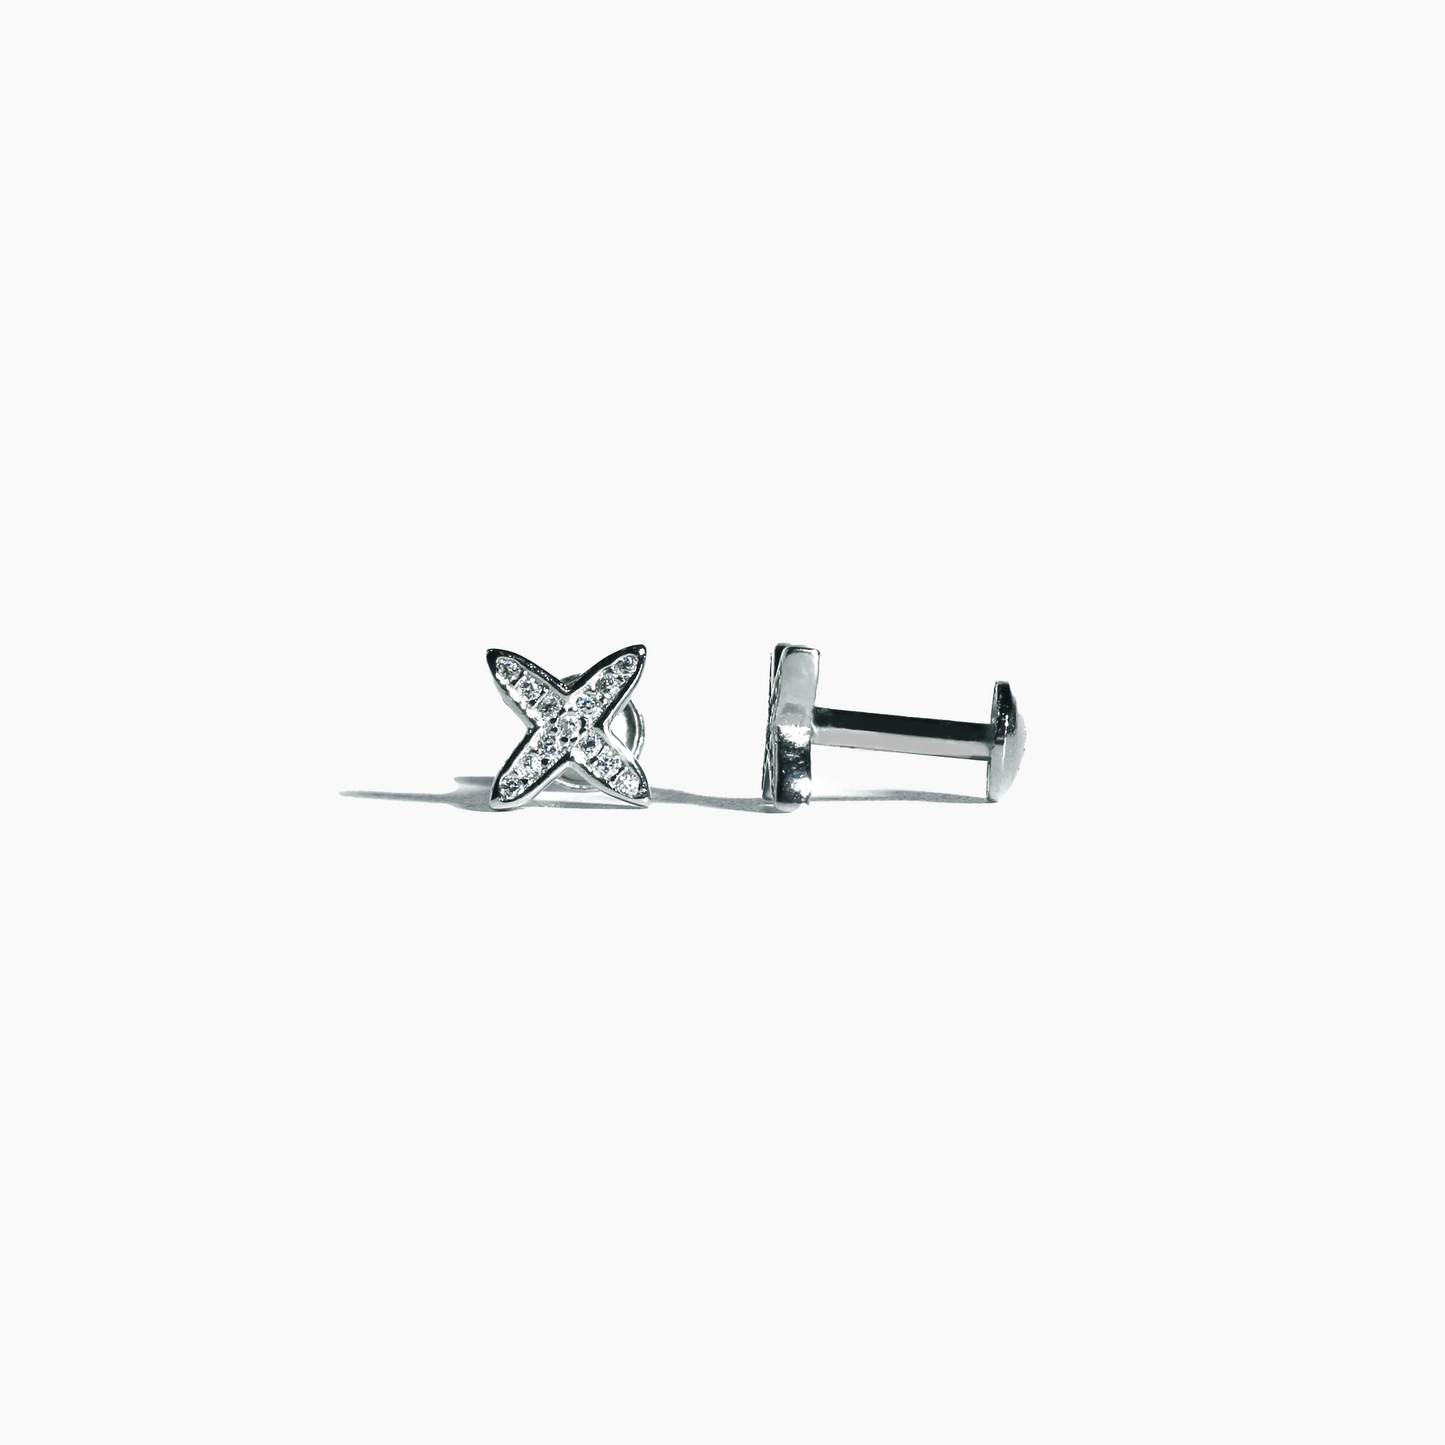 X Shaped 925 Sterling Silver Studs